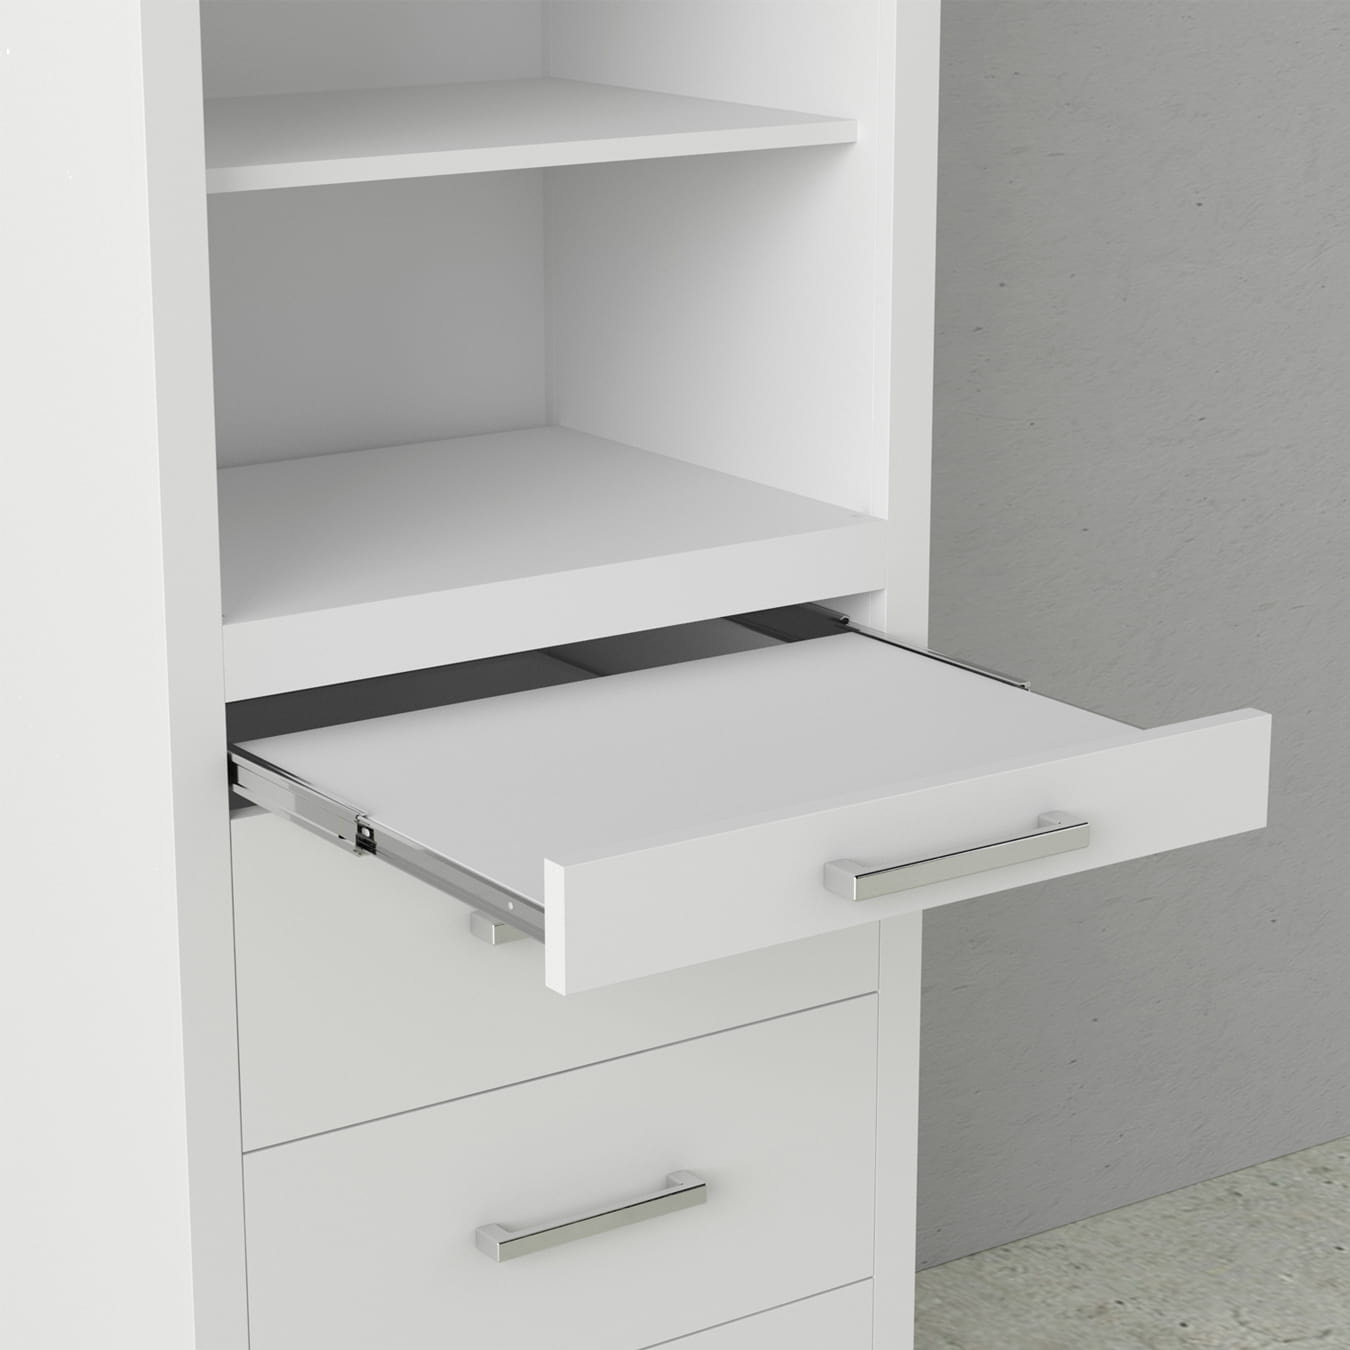 alegra storage cabinet with pullout nightstand pulled out for holding your devices